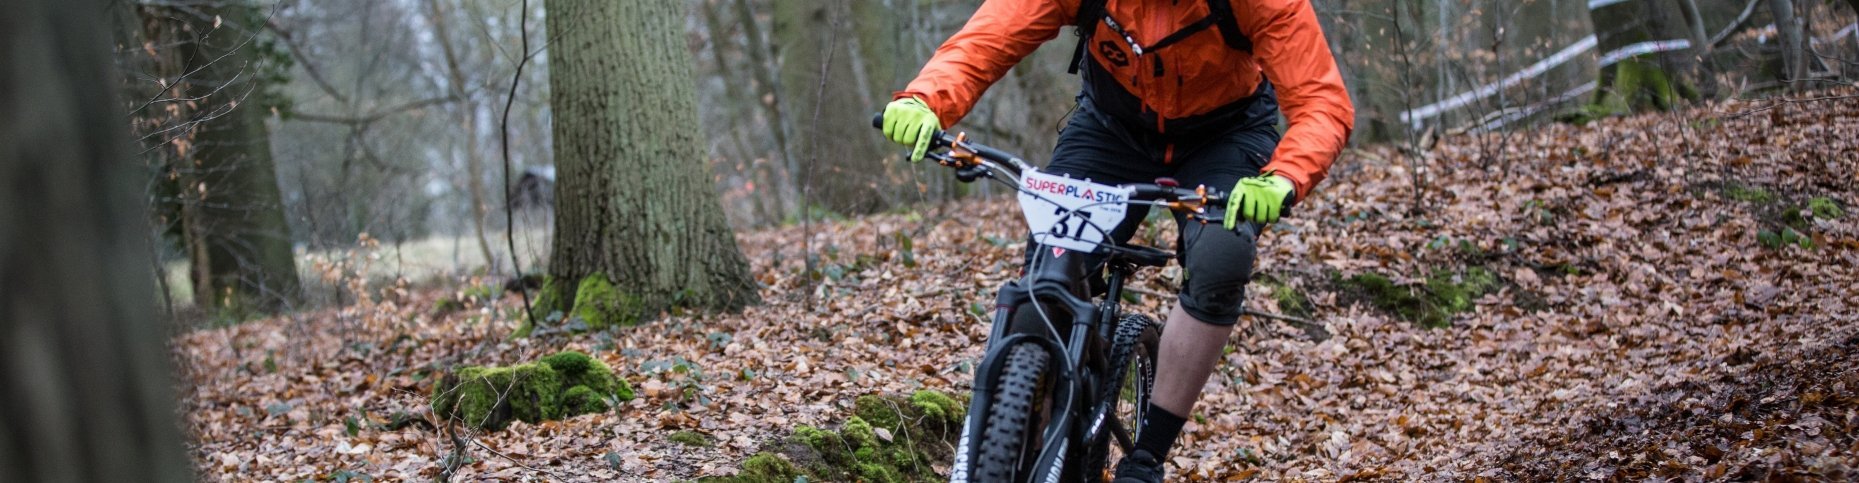 The Superplastic Cup in Esneux, Belgium. An Enduro race for everyone.